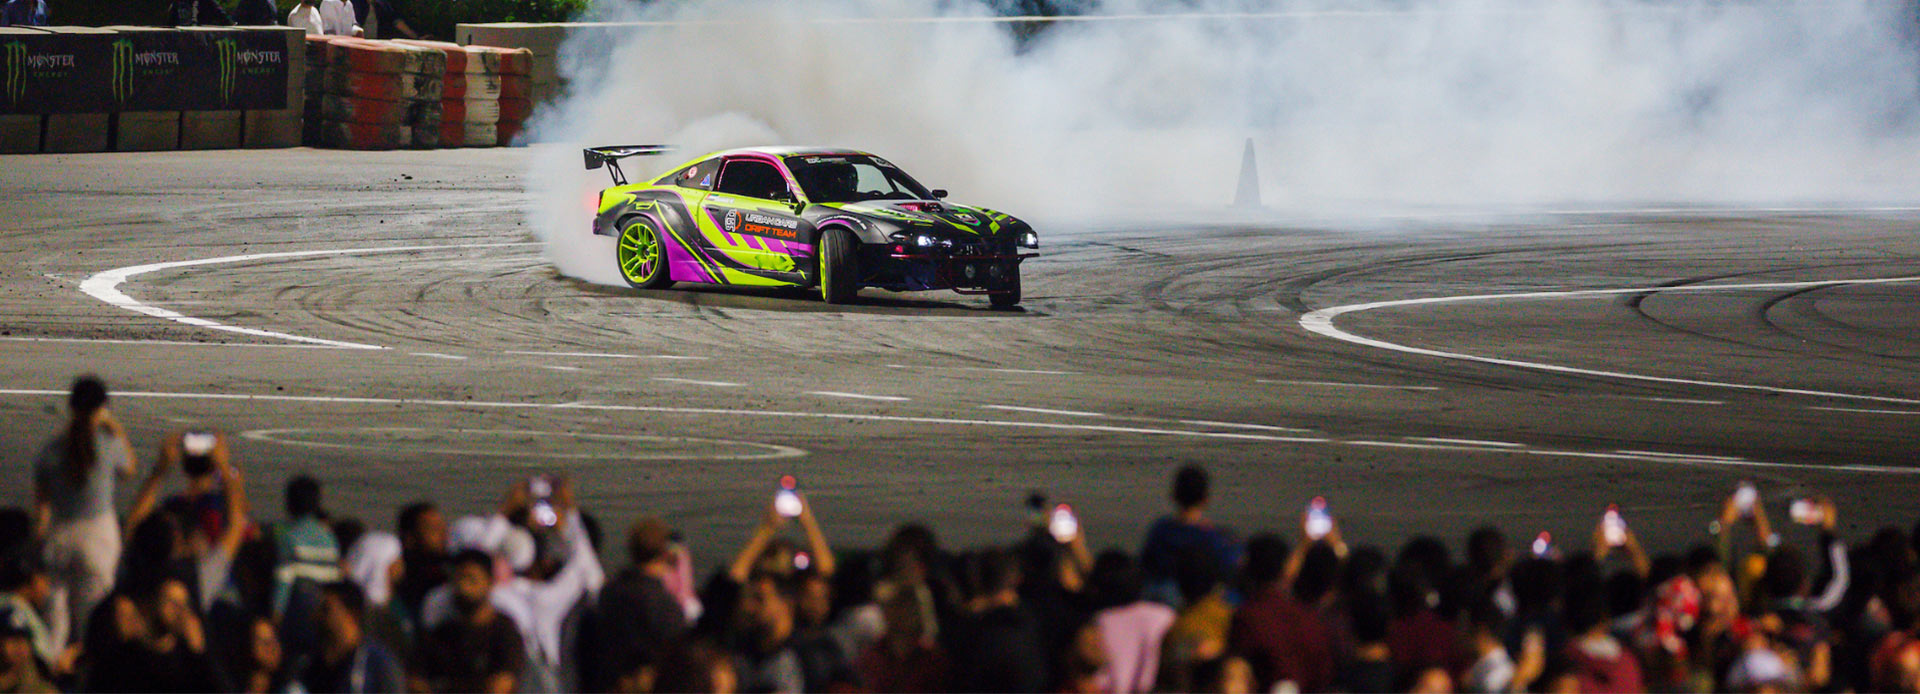 Emirates Drift Championship in action